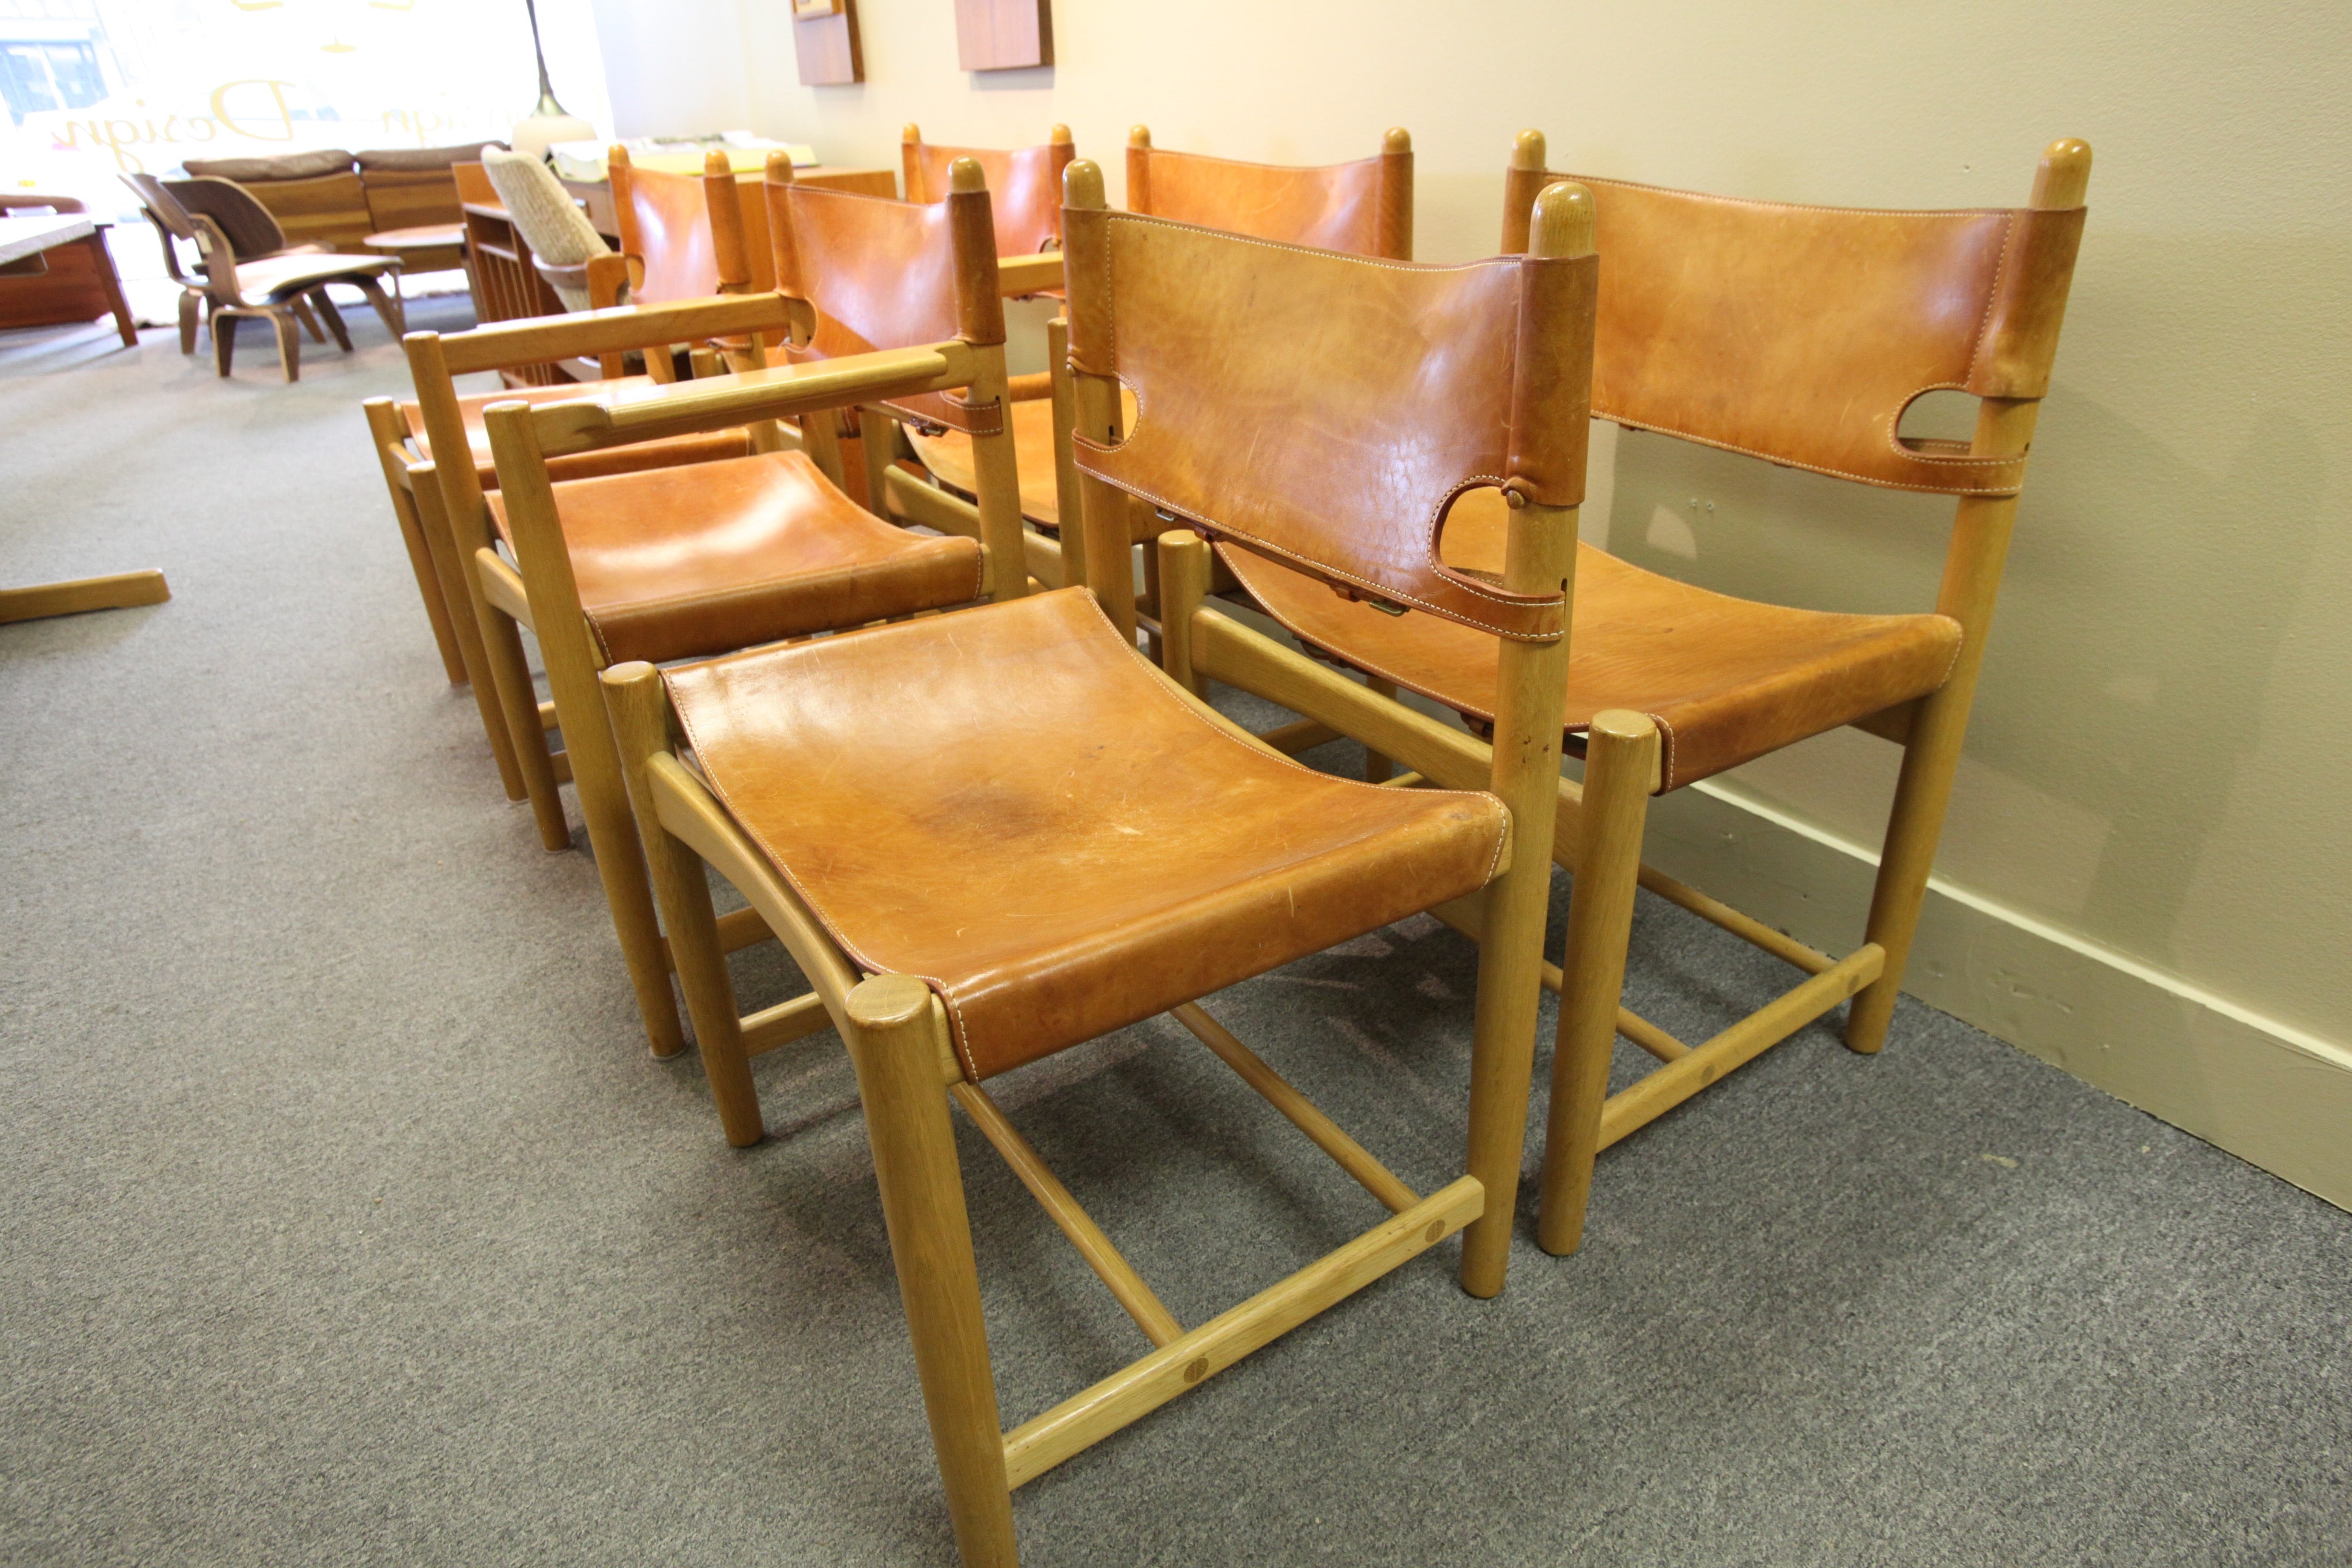 Set of 6 Danish Hunting Chairs by Borge Mogensen (Leather/Oak 1960's)